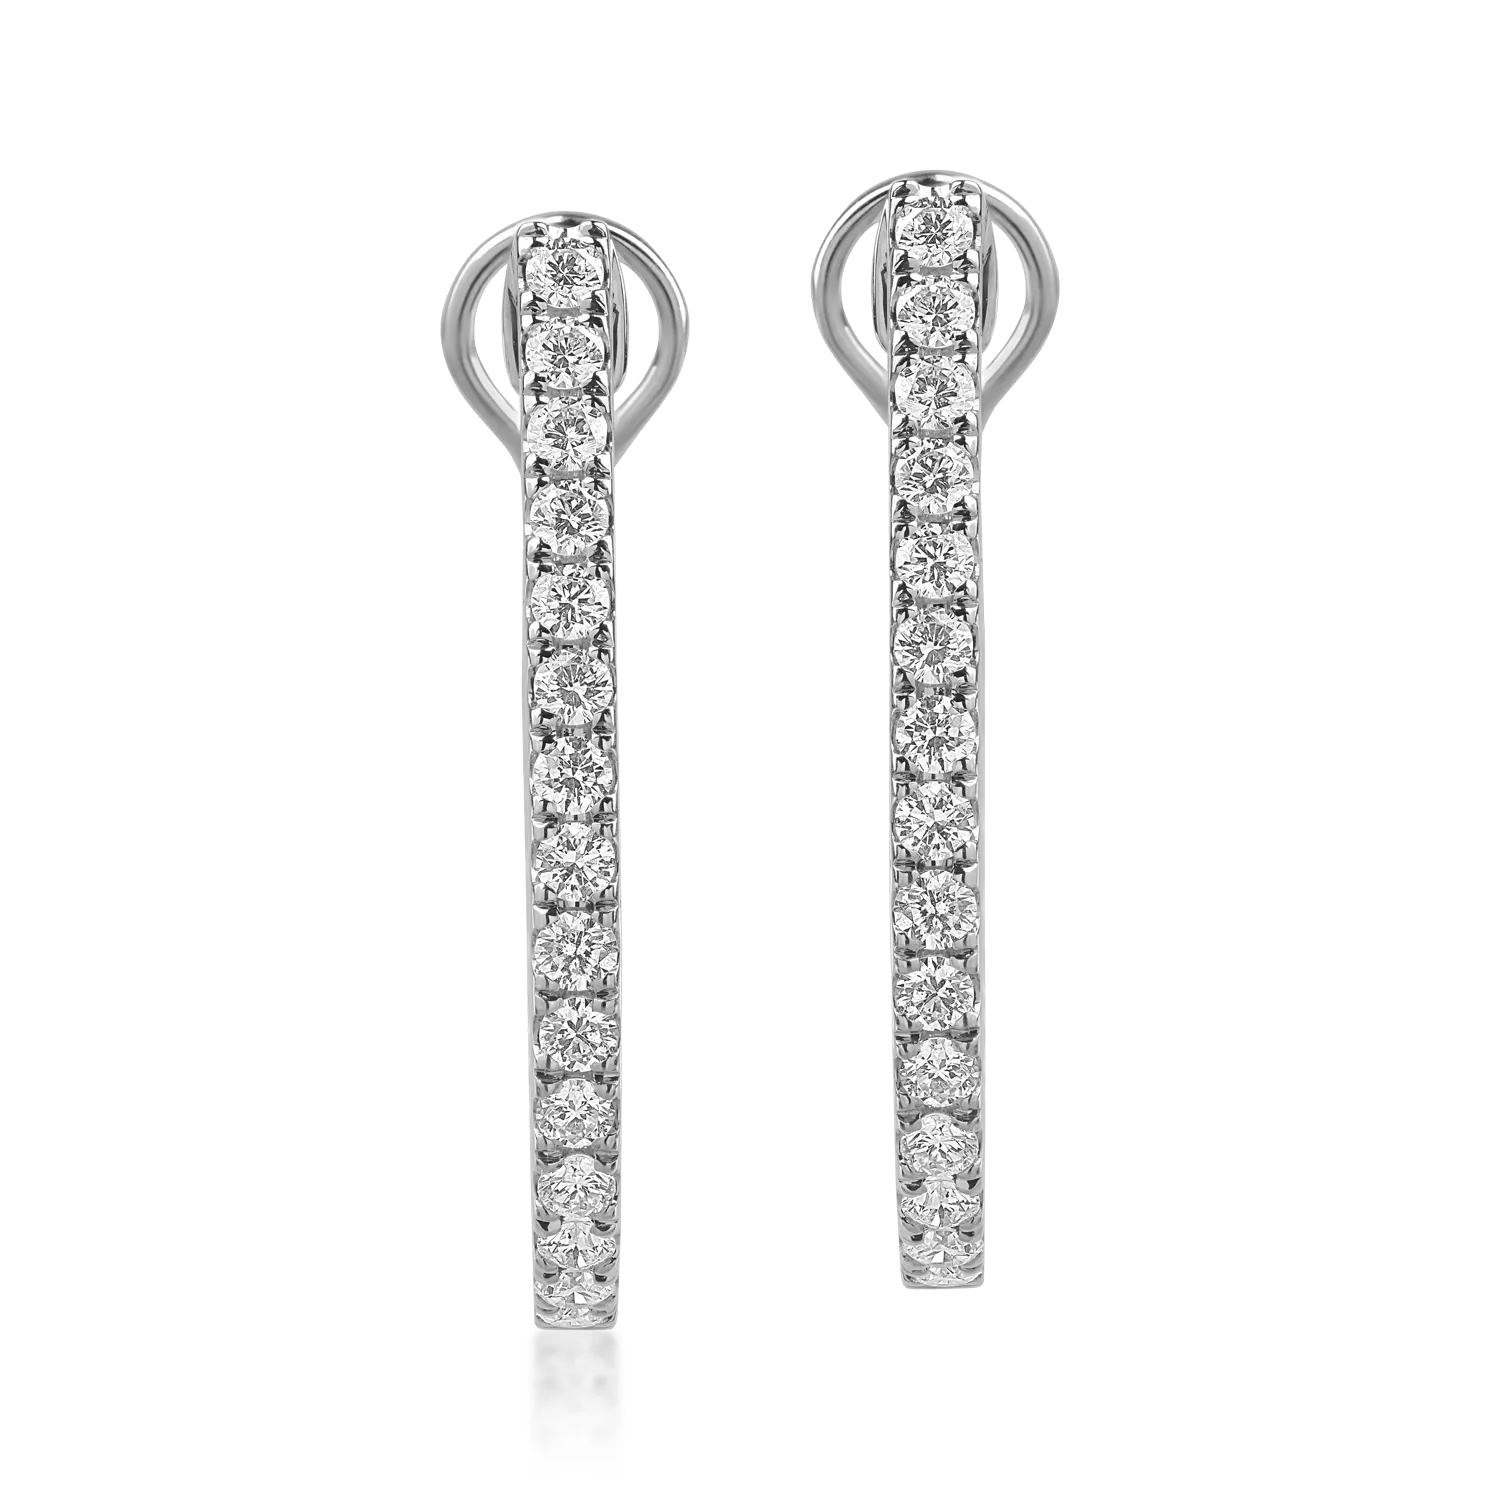 White gold earrings with 1.49ct diamonds